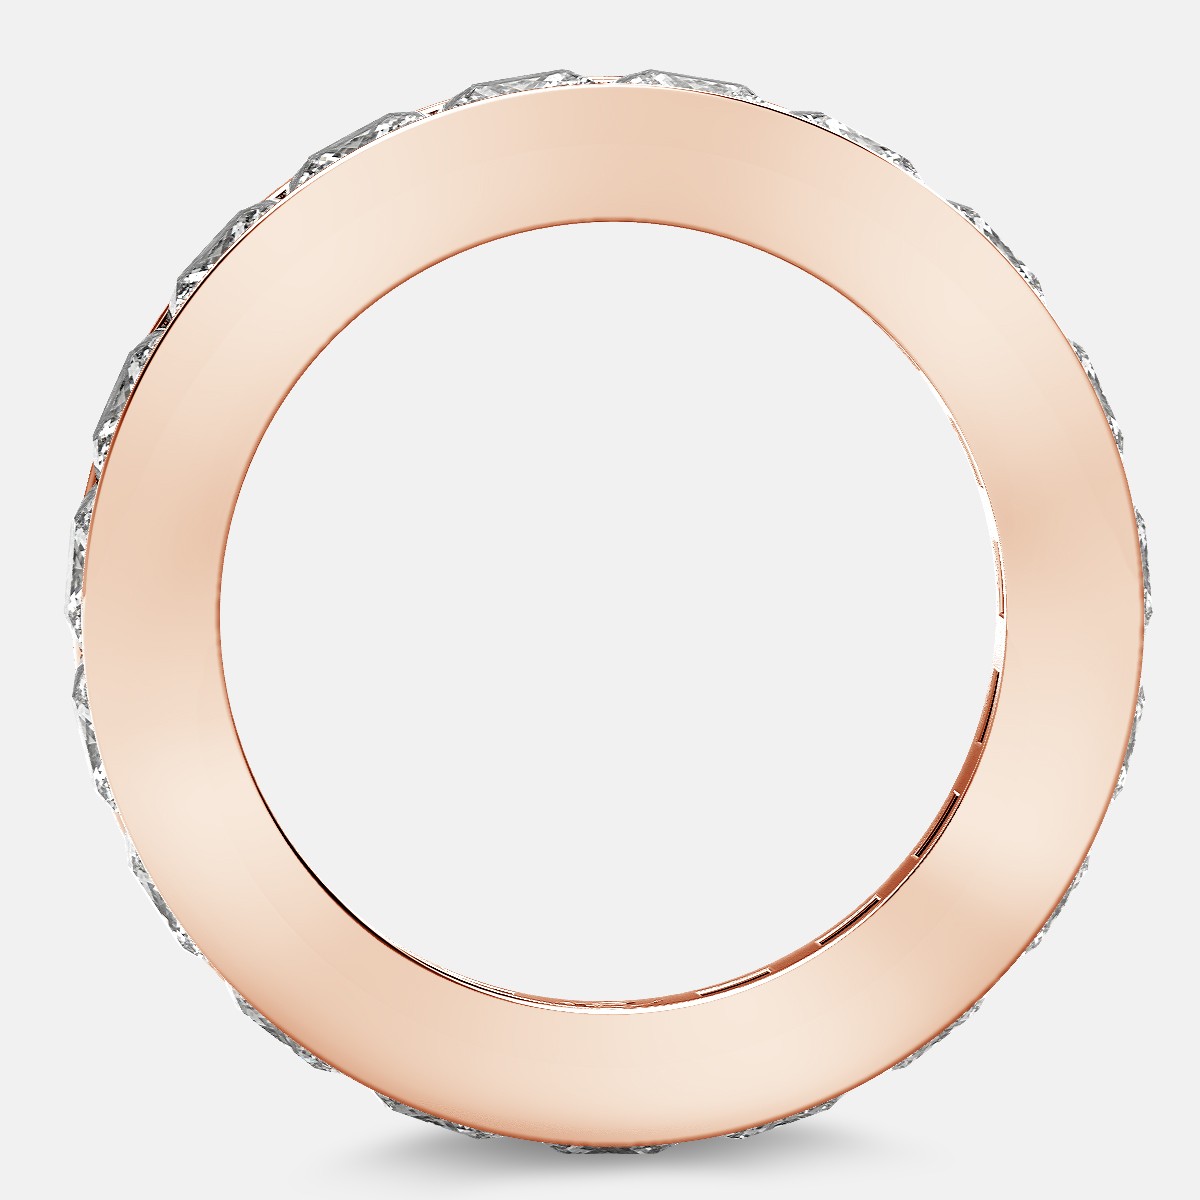 Eternity Ring with Channel Set Princess Cut Diamonds in 18k Rose Gold